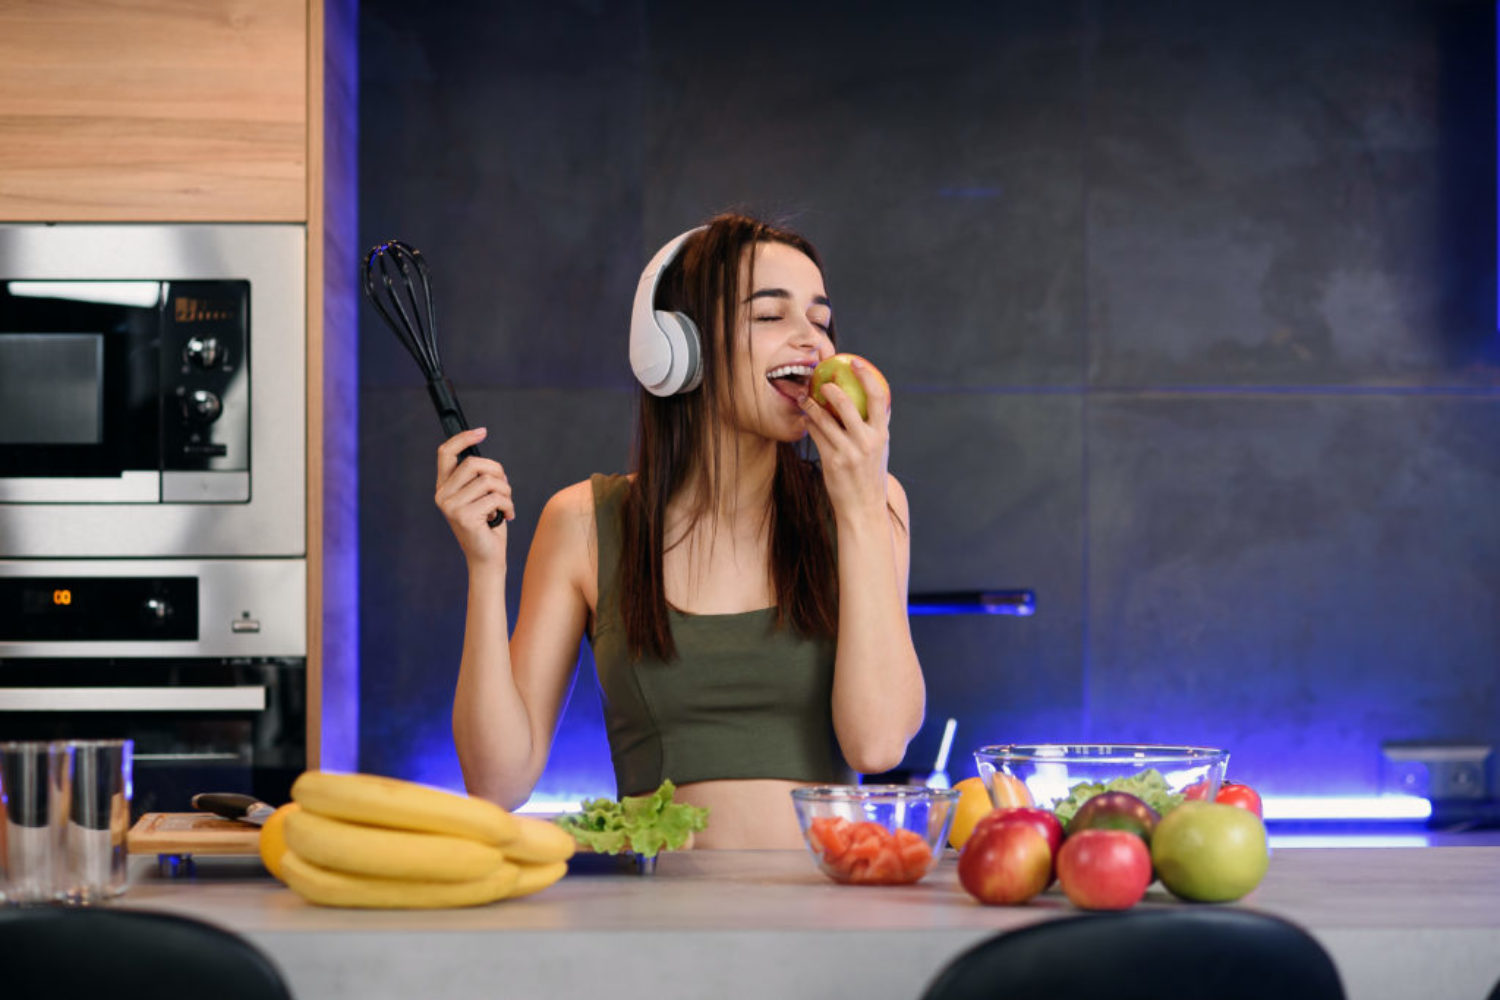 Young attractive woman eats red apple and listens to the music at kitchen in morning. Healthy lifestyle concept, enjoying breakfast.